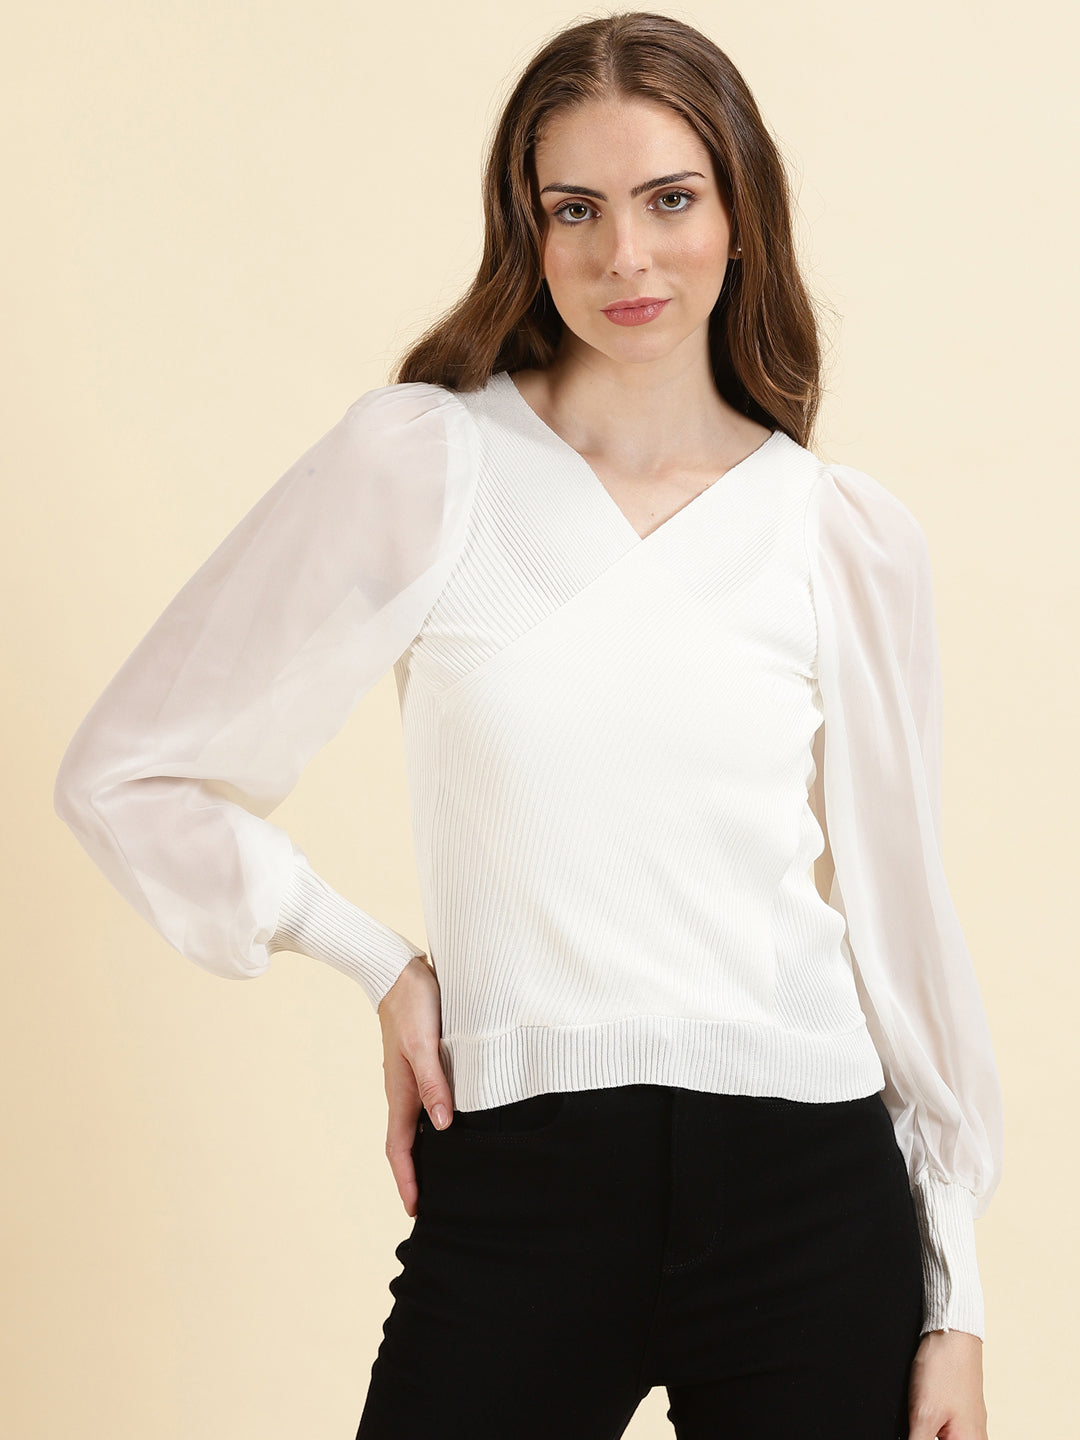 Women's Off White Solid Wrap Top